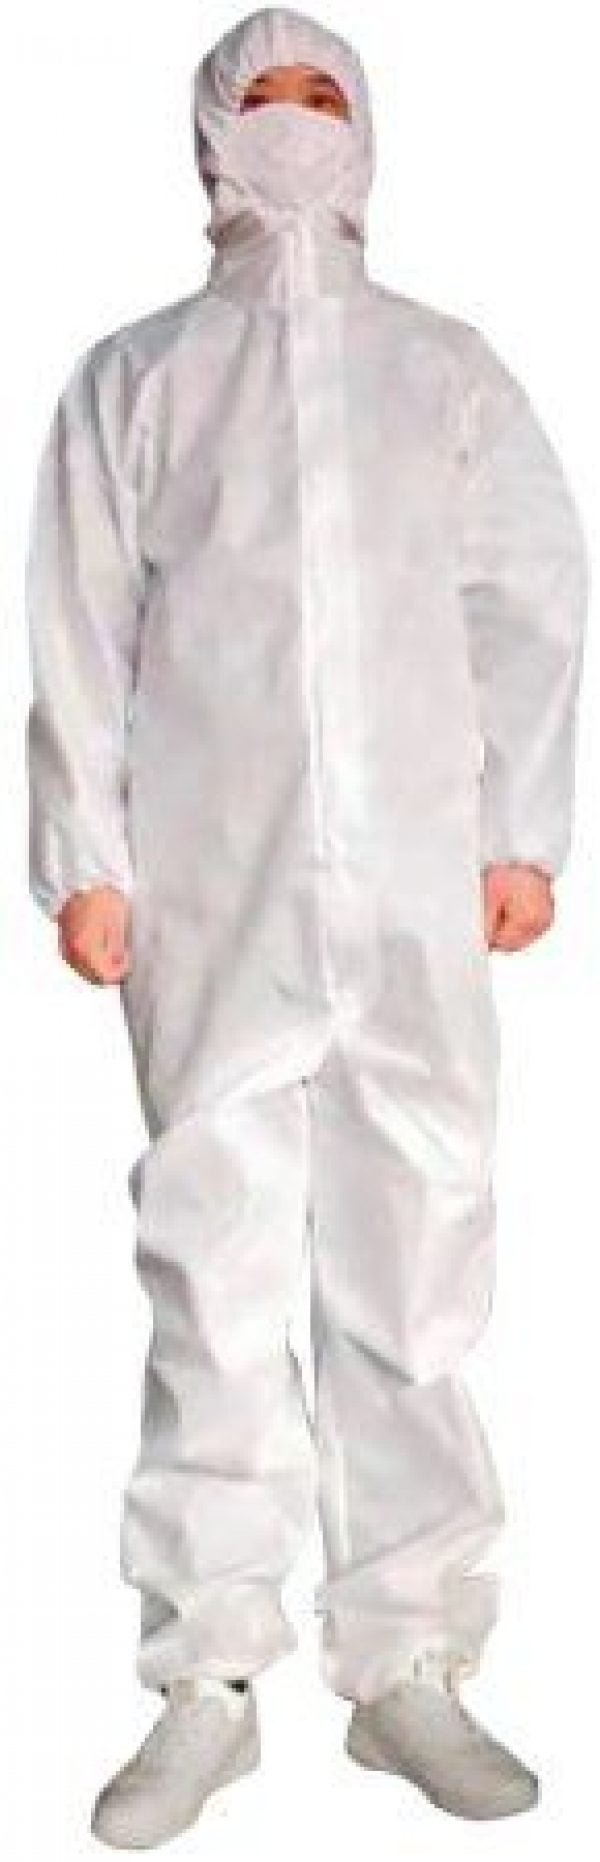 Cypress Disposable Coverall, White, X-Large, Case of 50